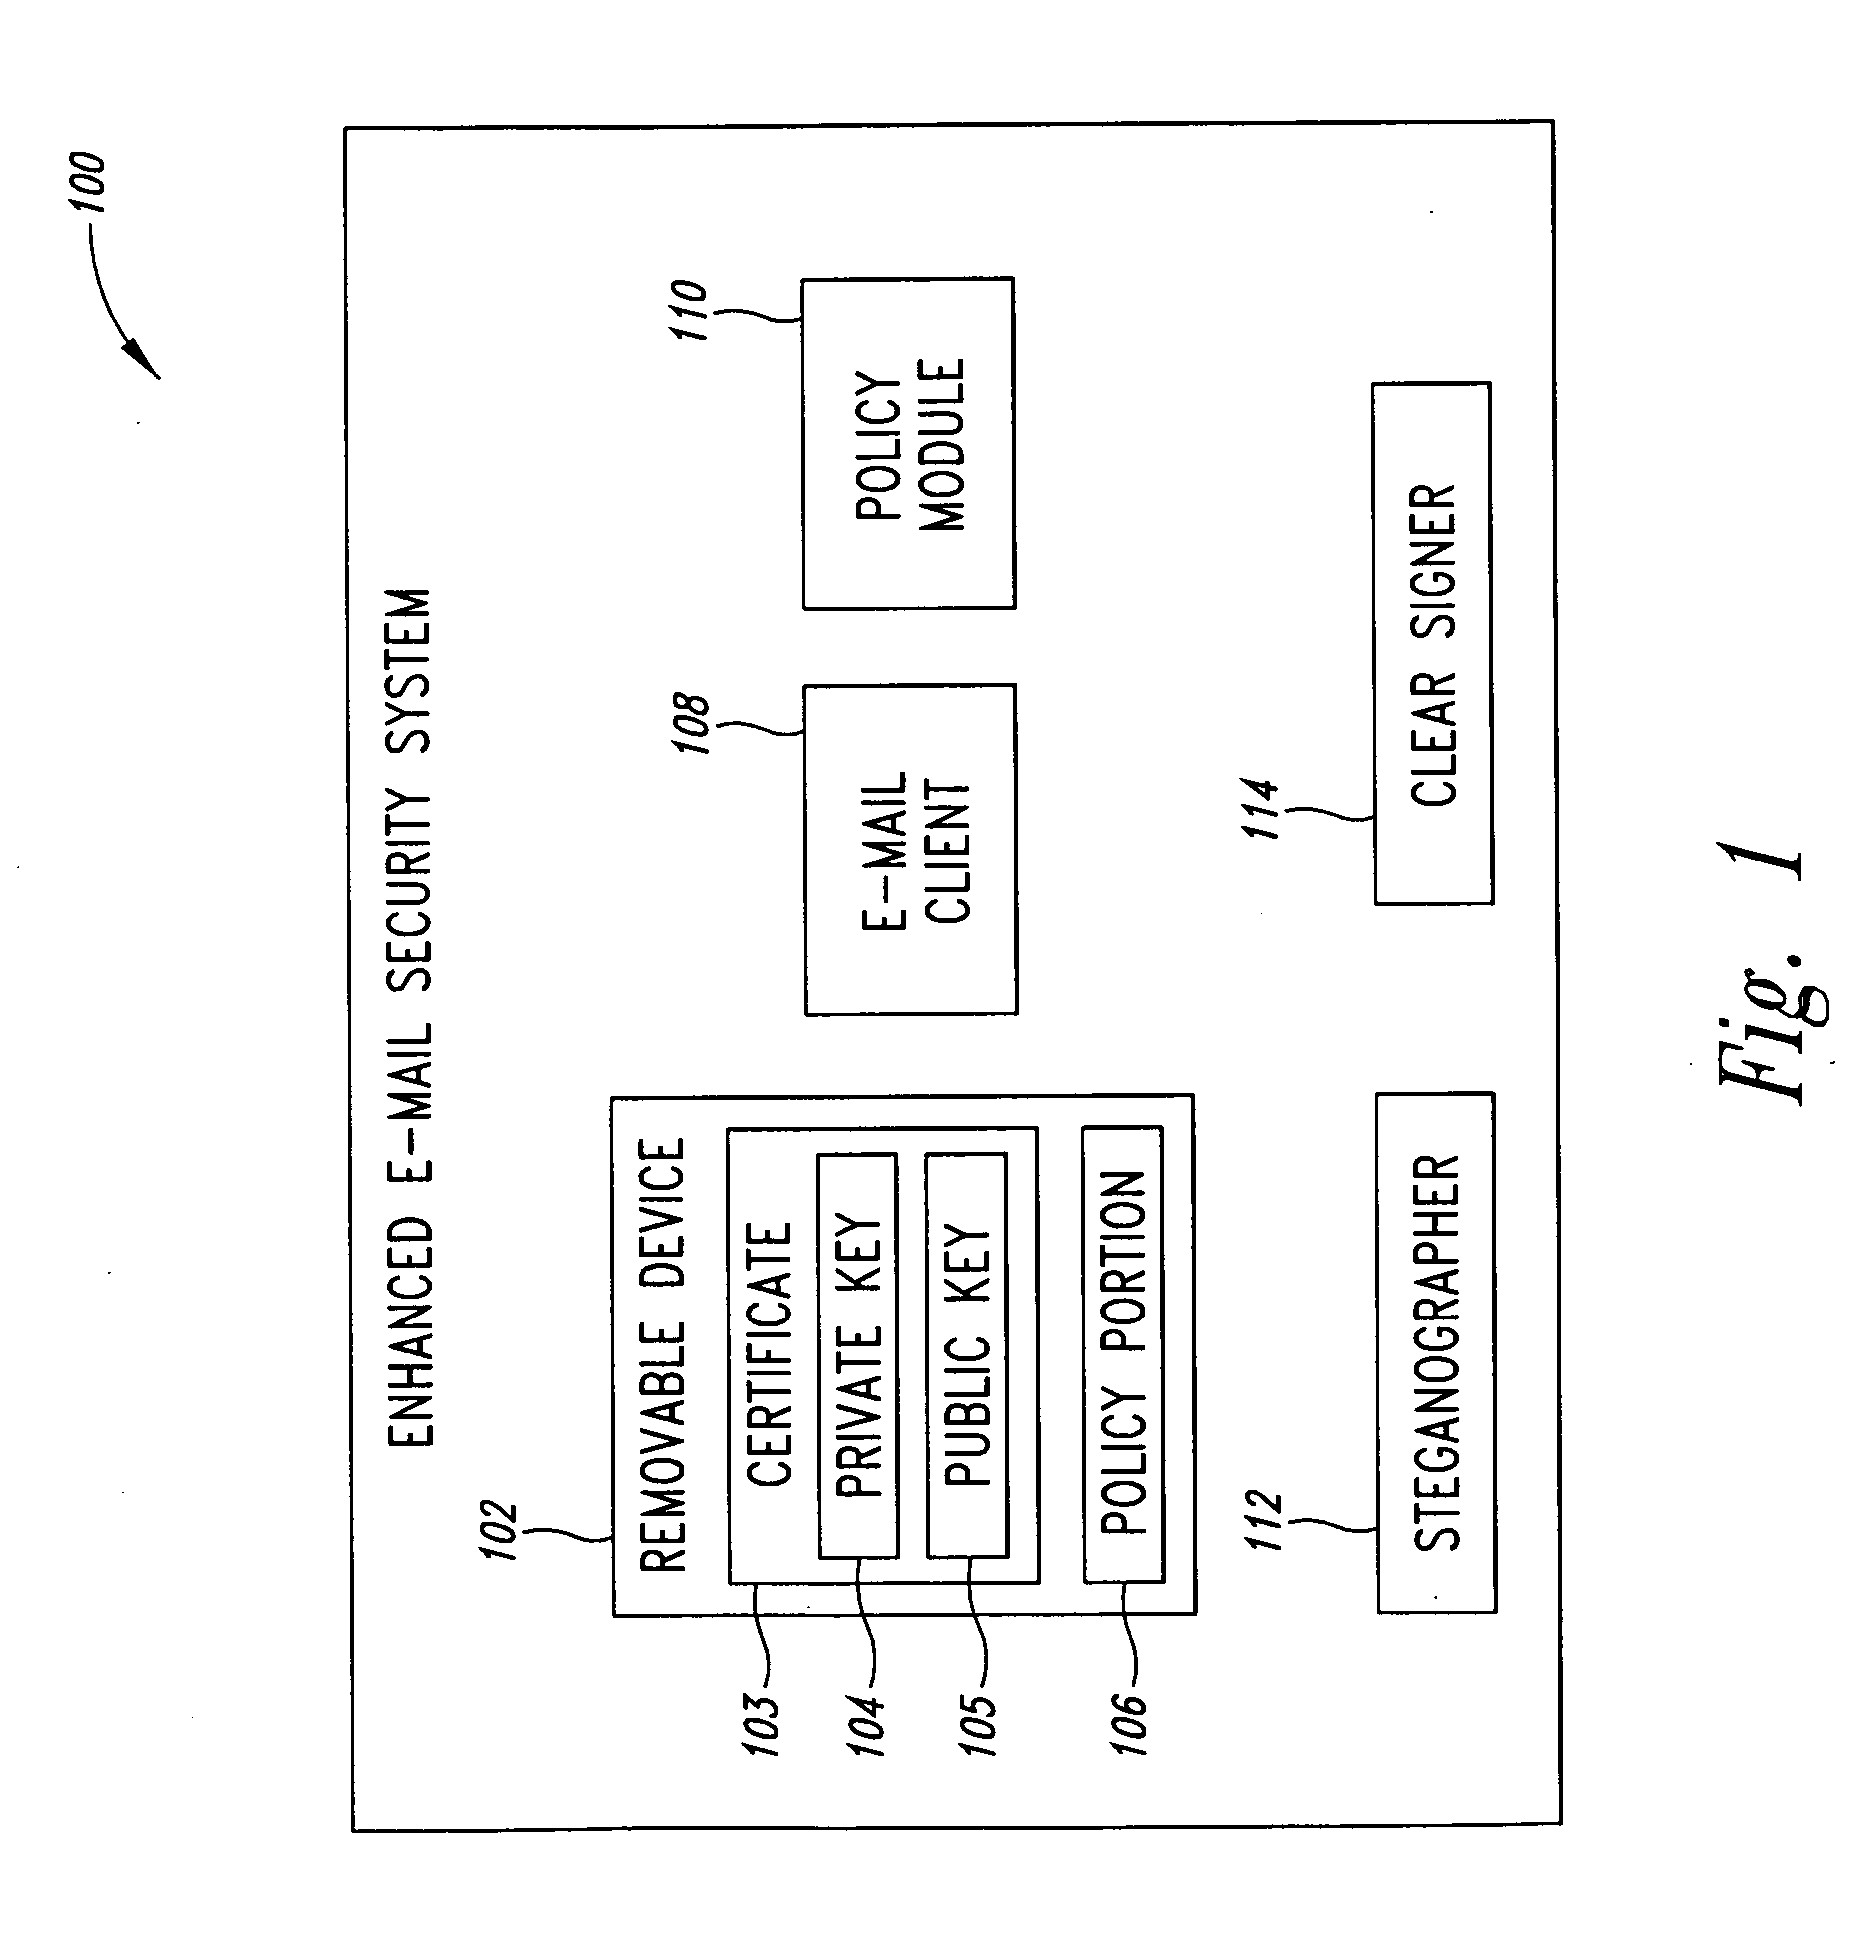 Enhanced electronic mail security system and method